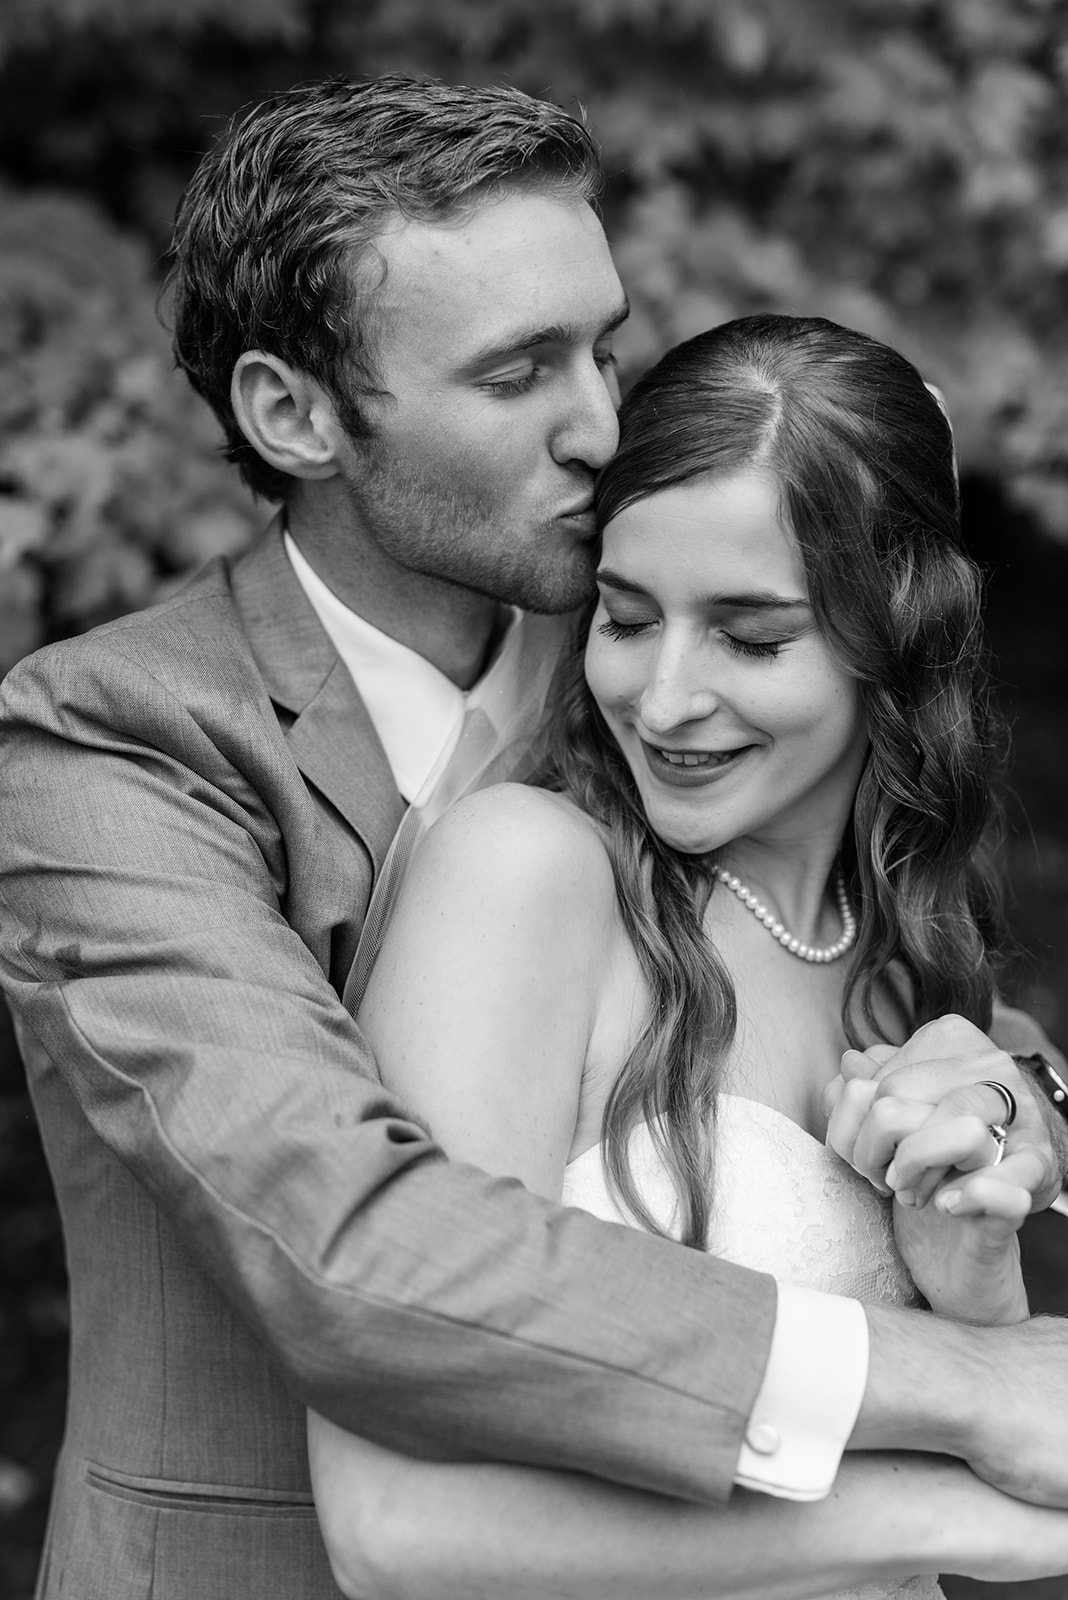 Black and white image of groom and bride kissing on their wedding day